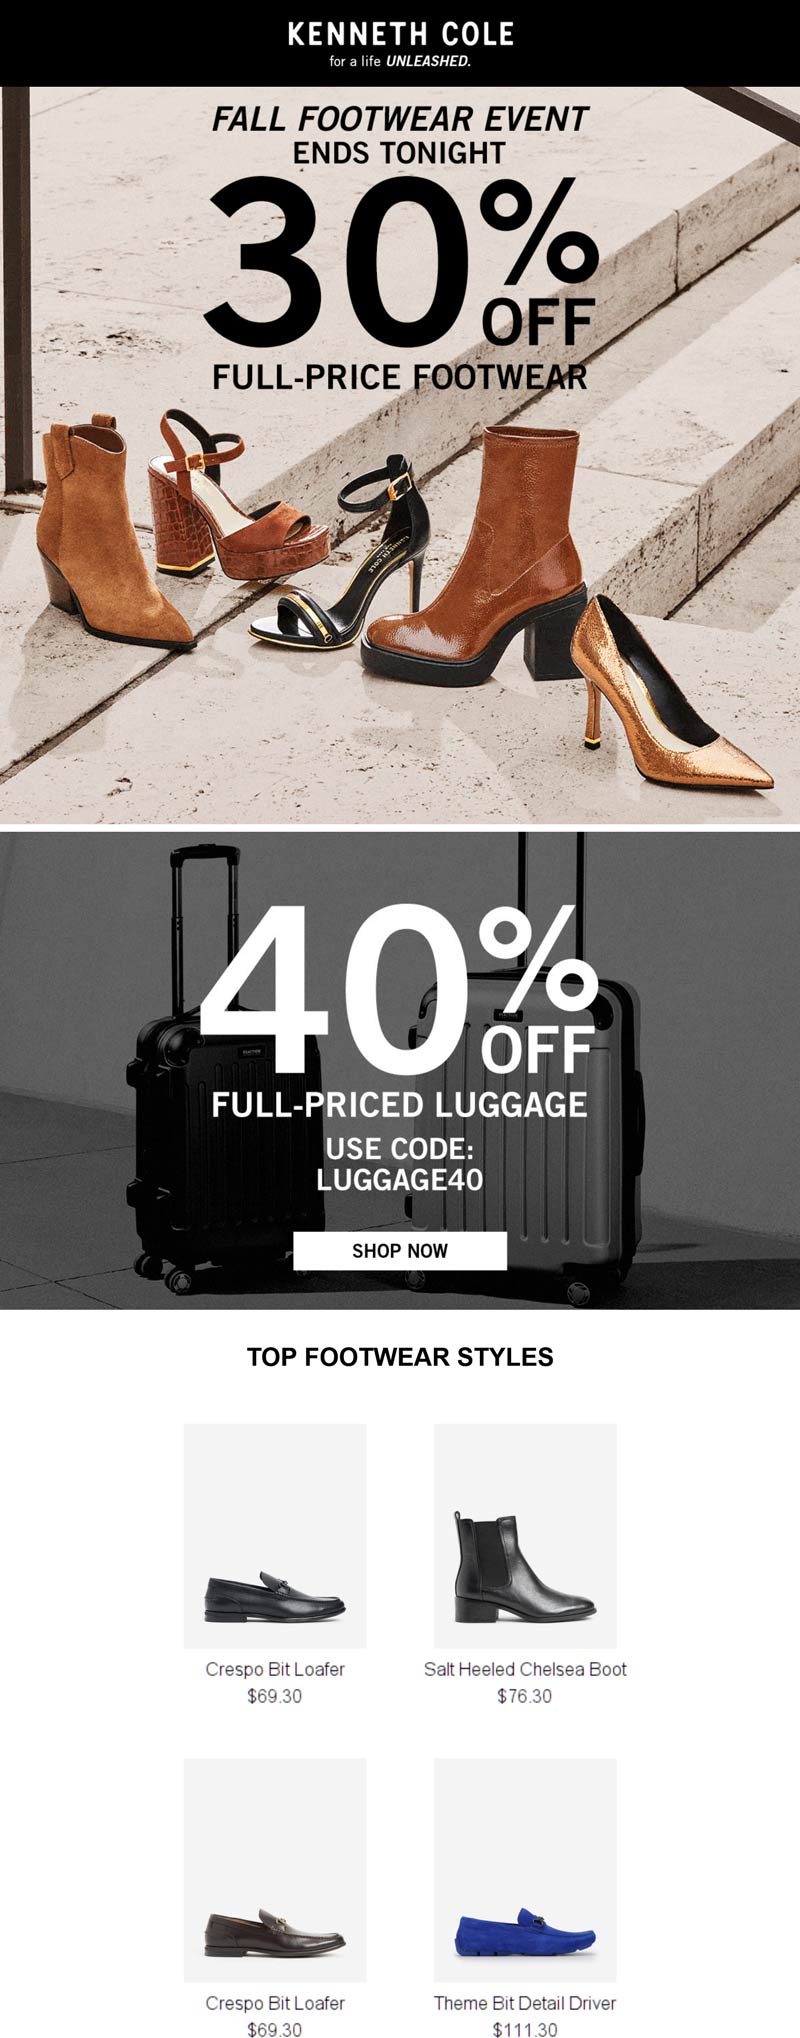 Kenneth Cole coupons & promo code for [December 2022]